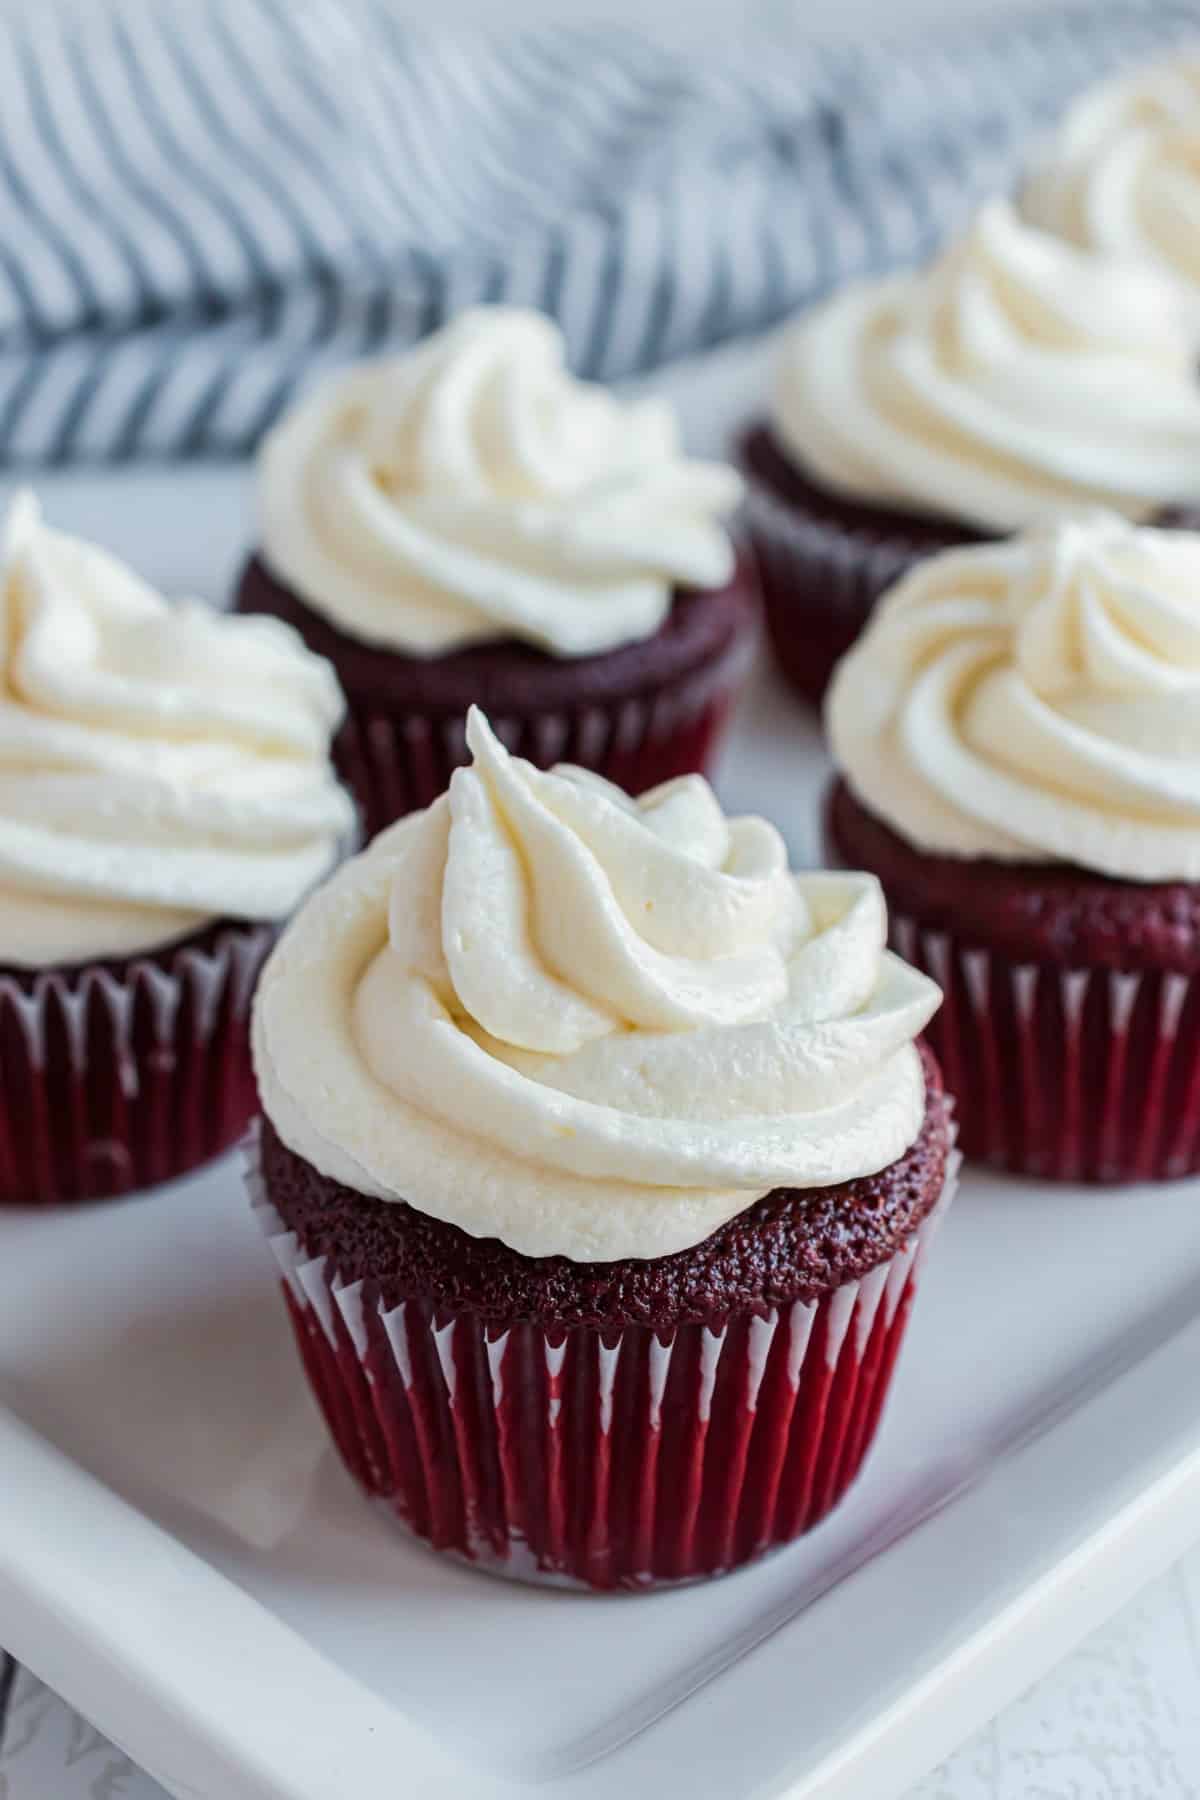 Cream cheese frosting on red velvet cupcakes.